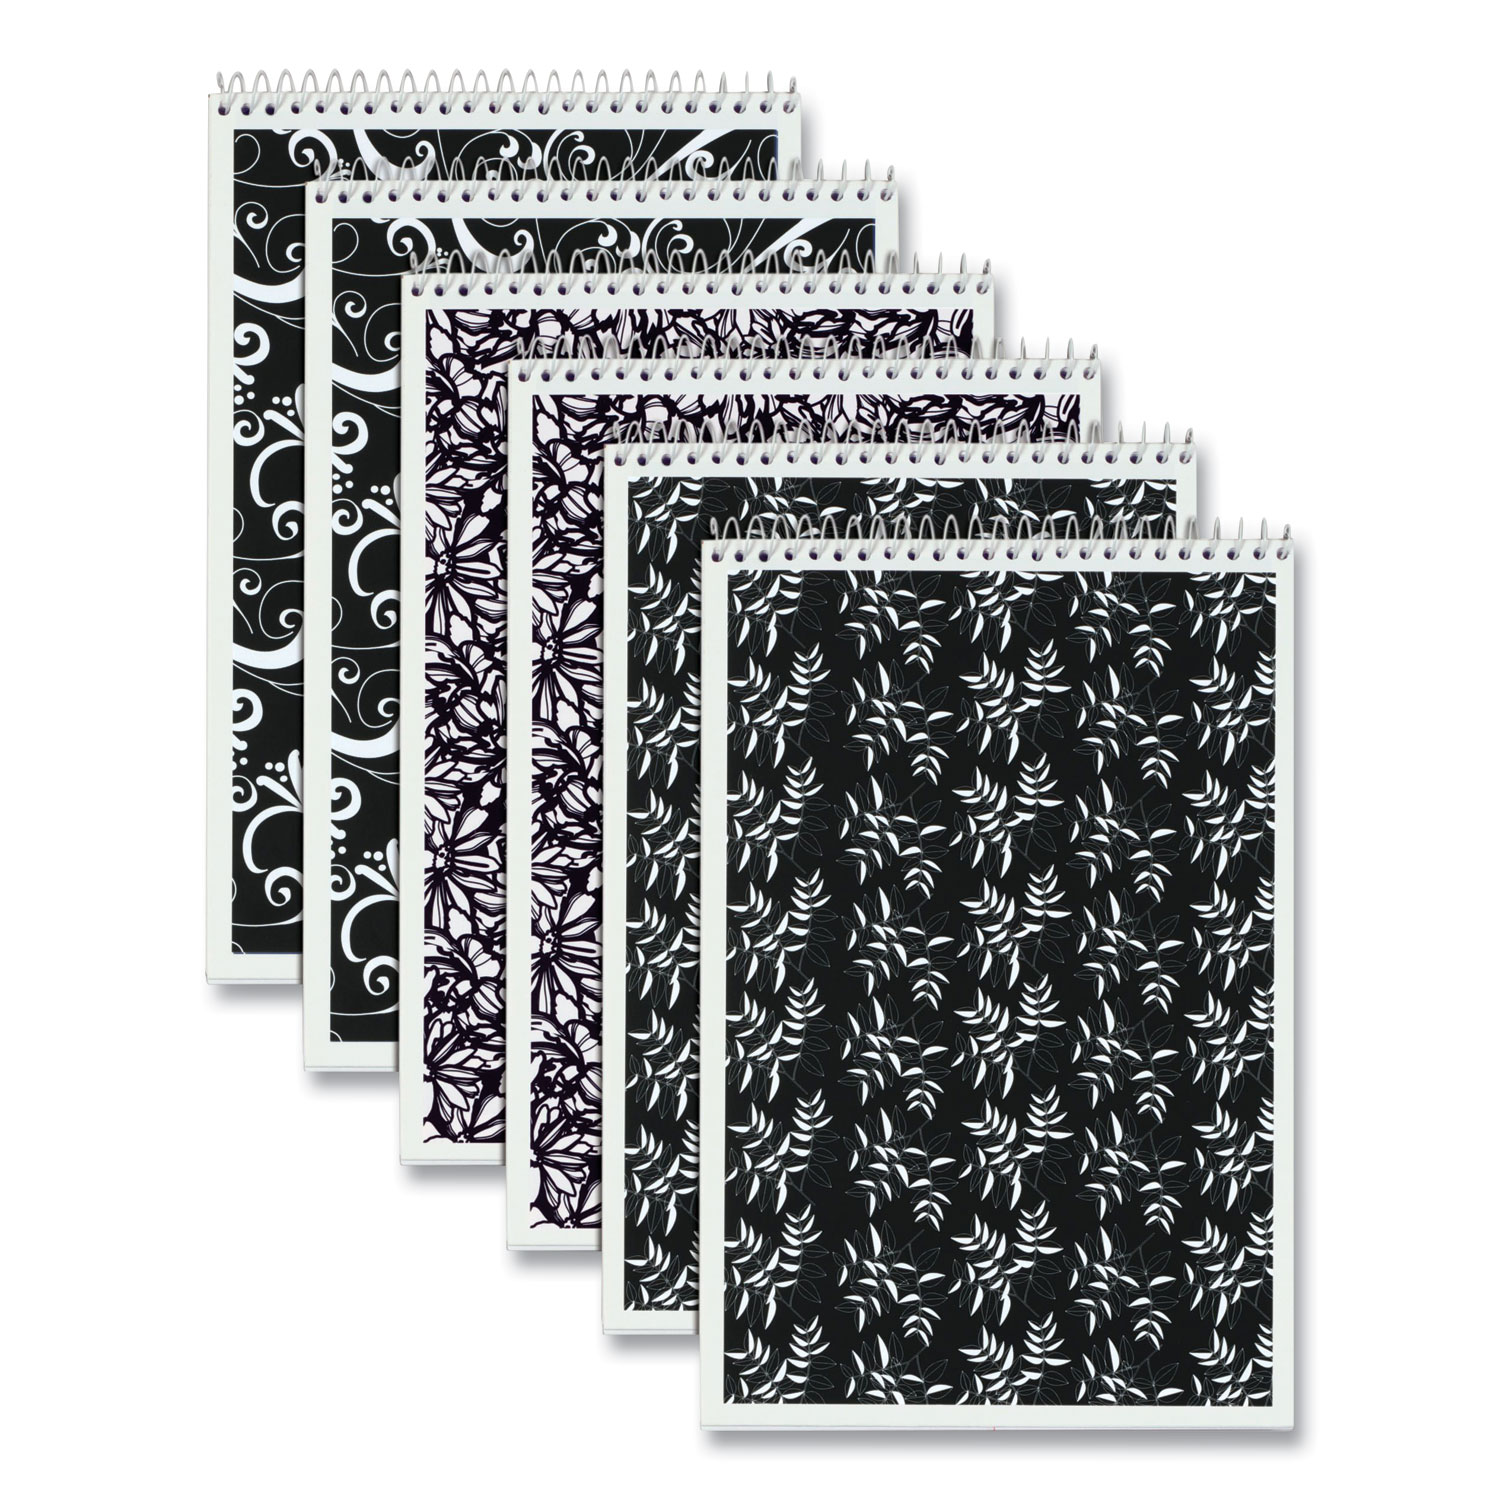  TOPS 80230 Fashion Steno Book, Gregg Rule, Assorted Black/White Patterned Covers, 6 x 9, 80 White Sheets, 6/Pack (TOP355712) 